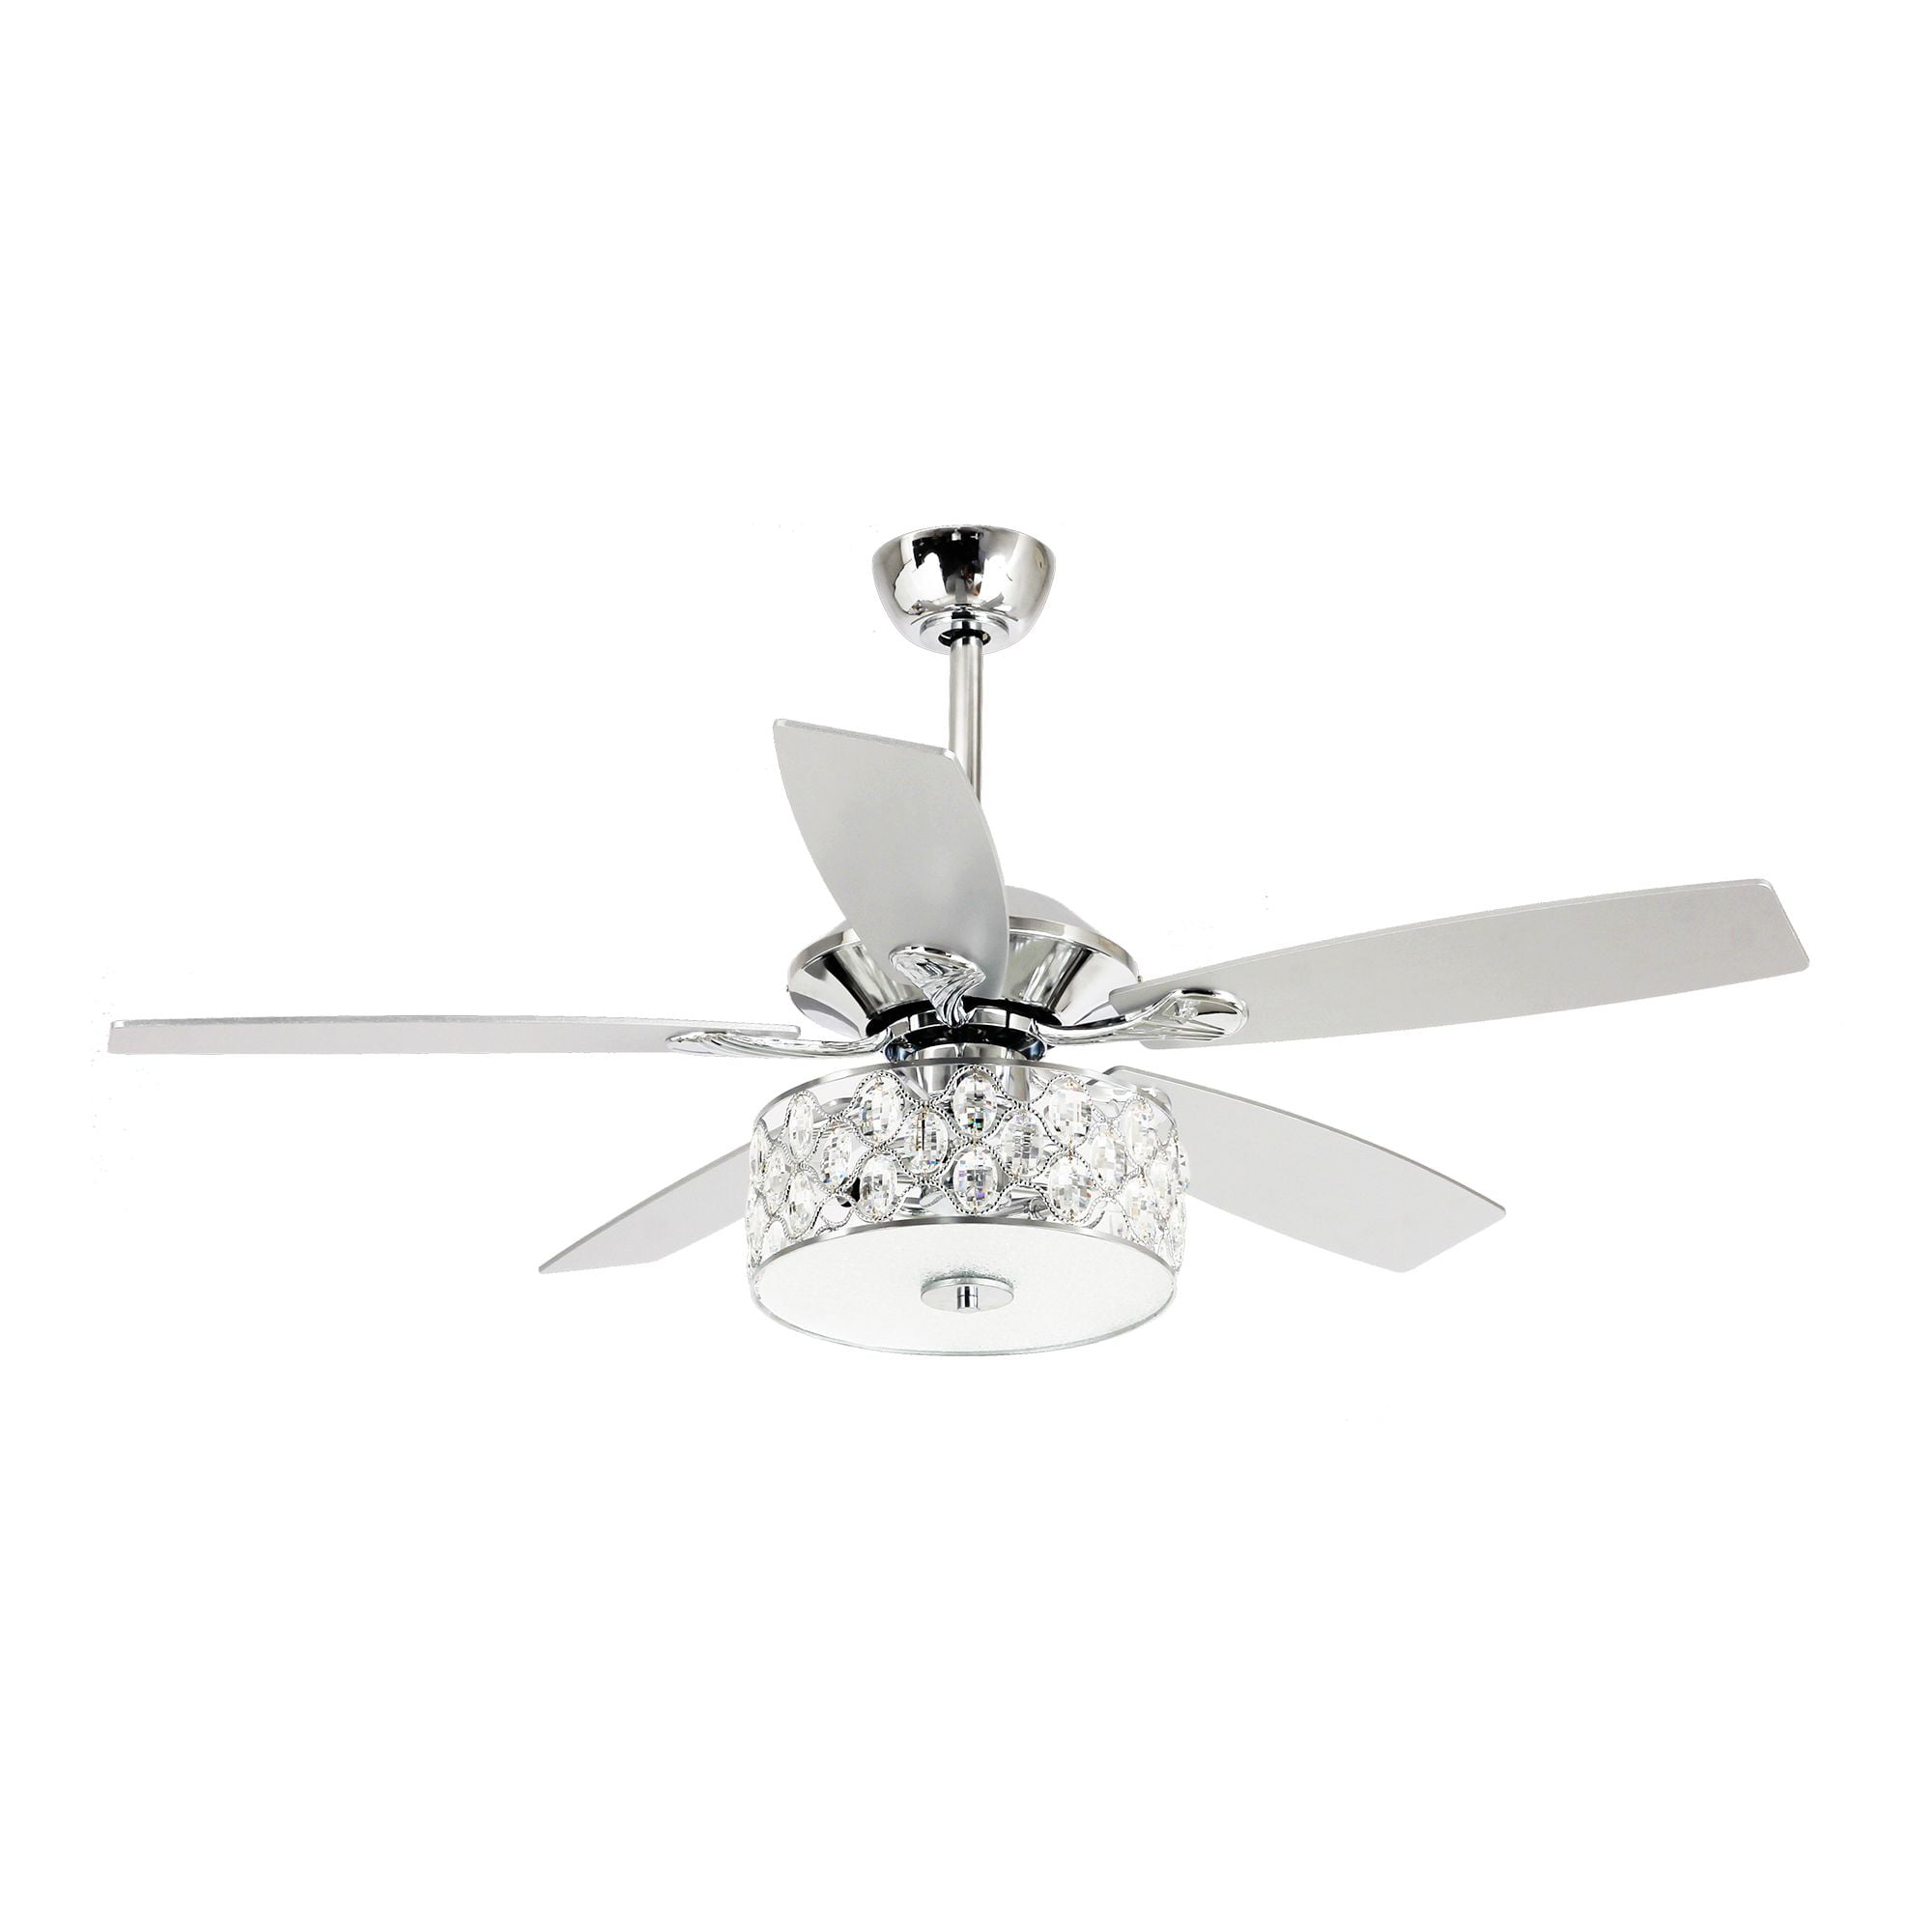 Ceiling Fans Lights With Remote Control, Crystal Chandelier Ceiling Fan With Remote